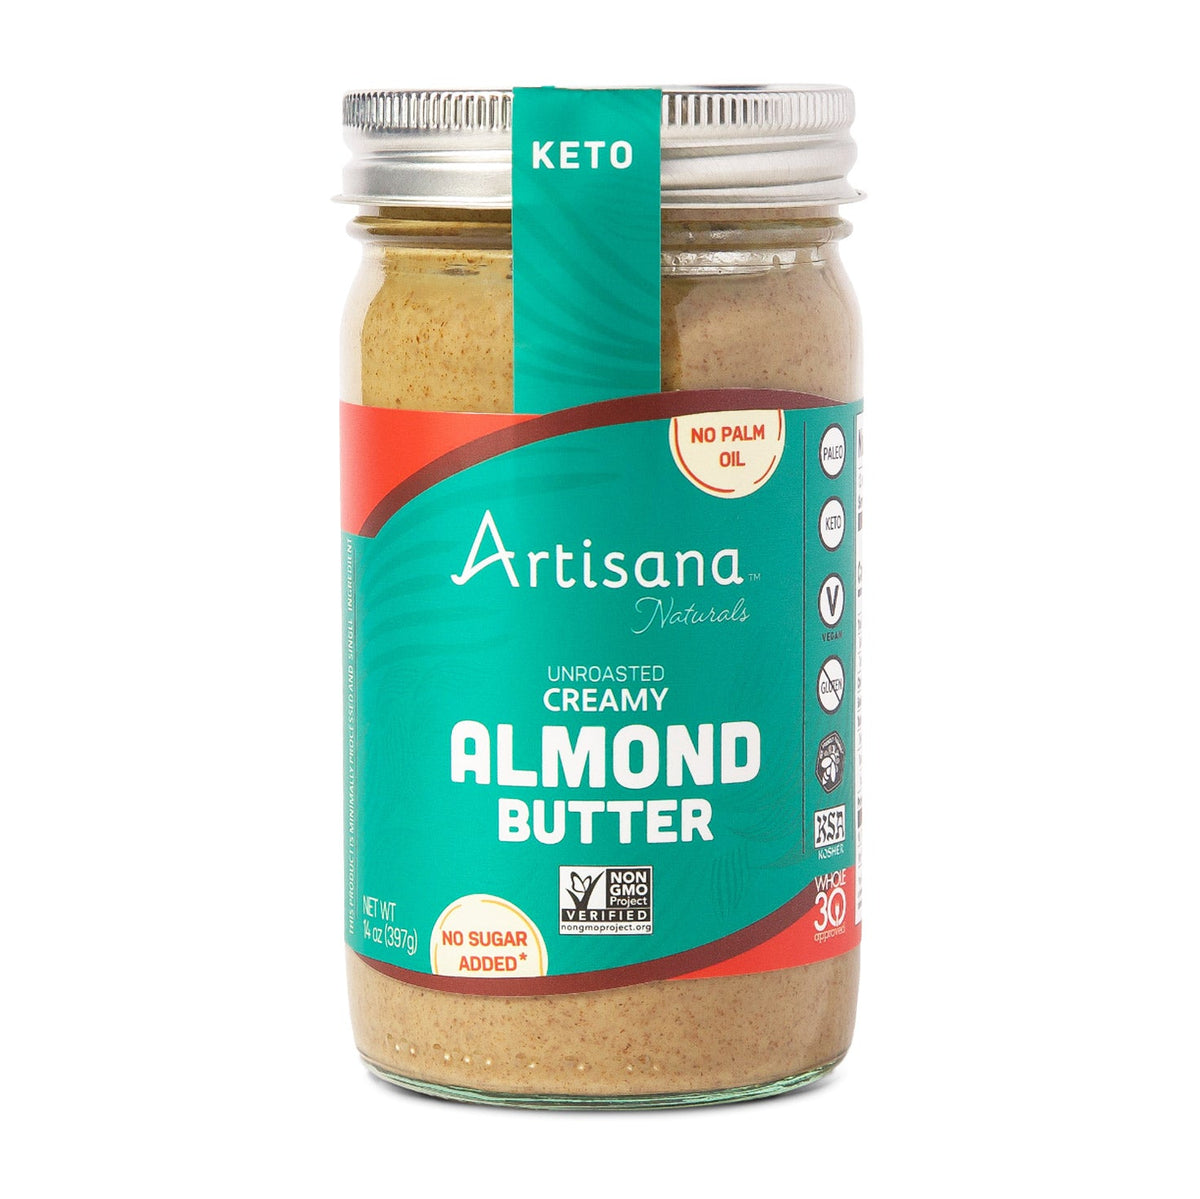 Unroasted Creamy Almond Butter